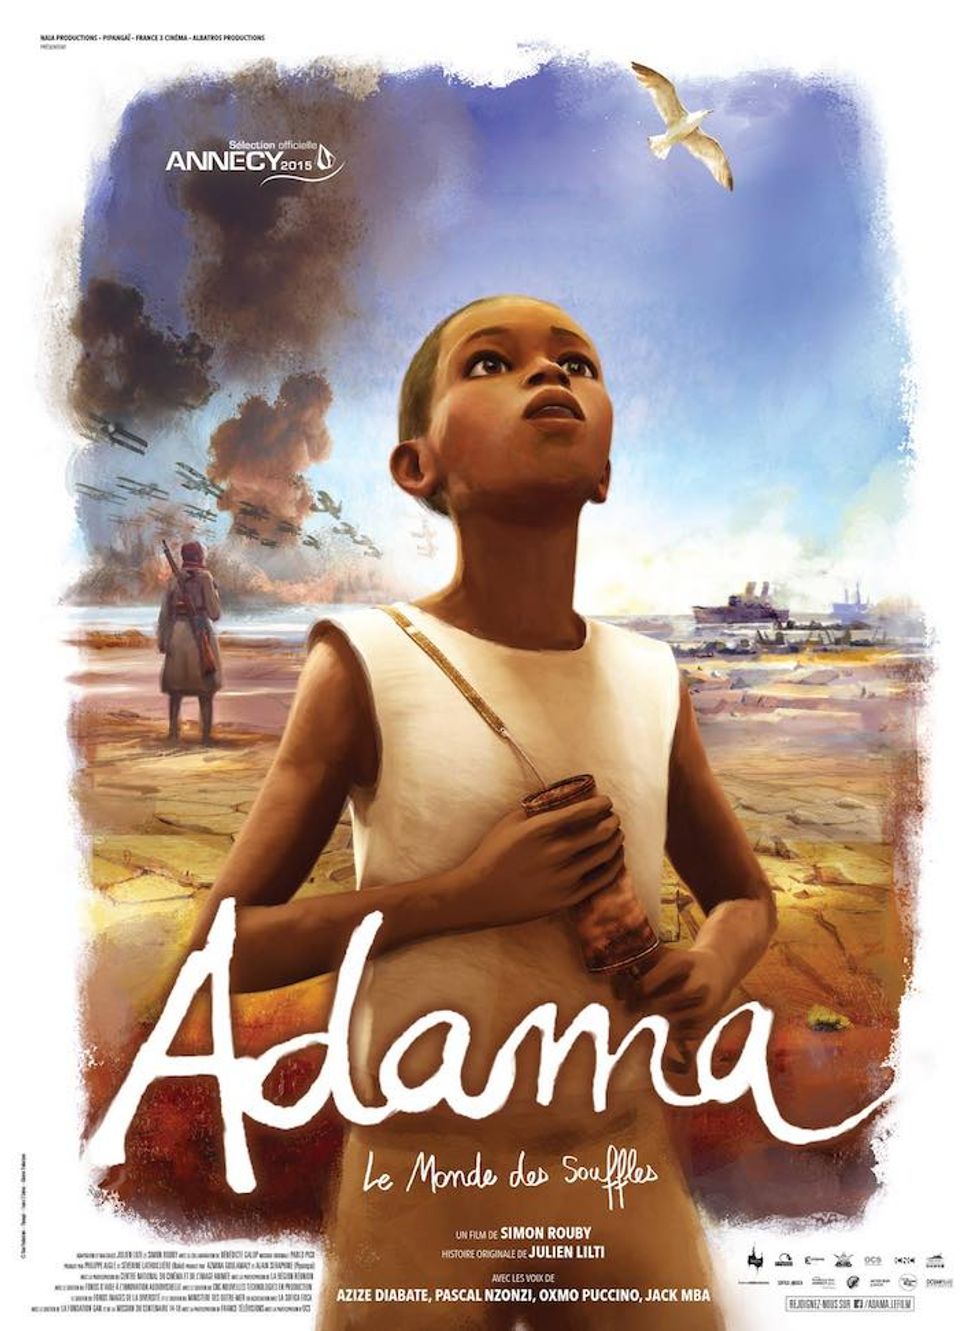 'Adama,' A New Animated Feature About A Young West African Boy During WWI, Debuts Trailer